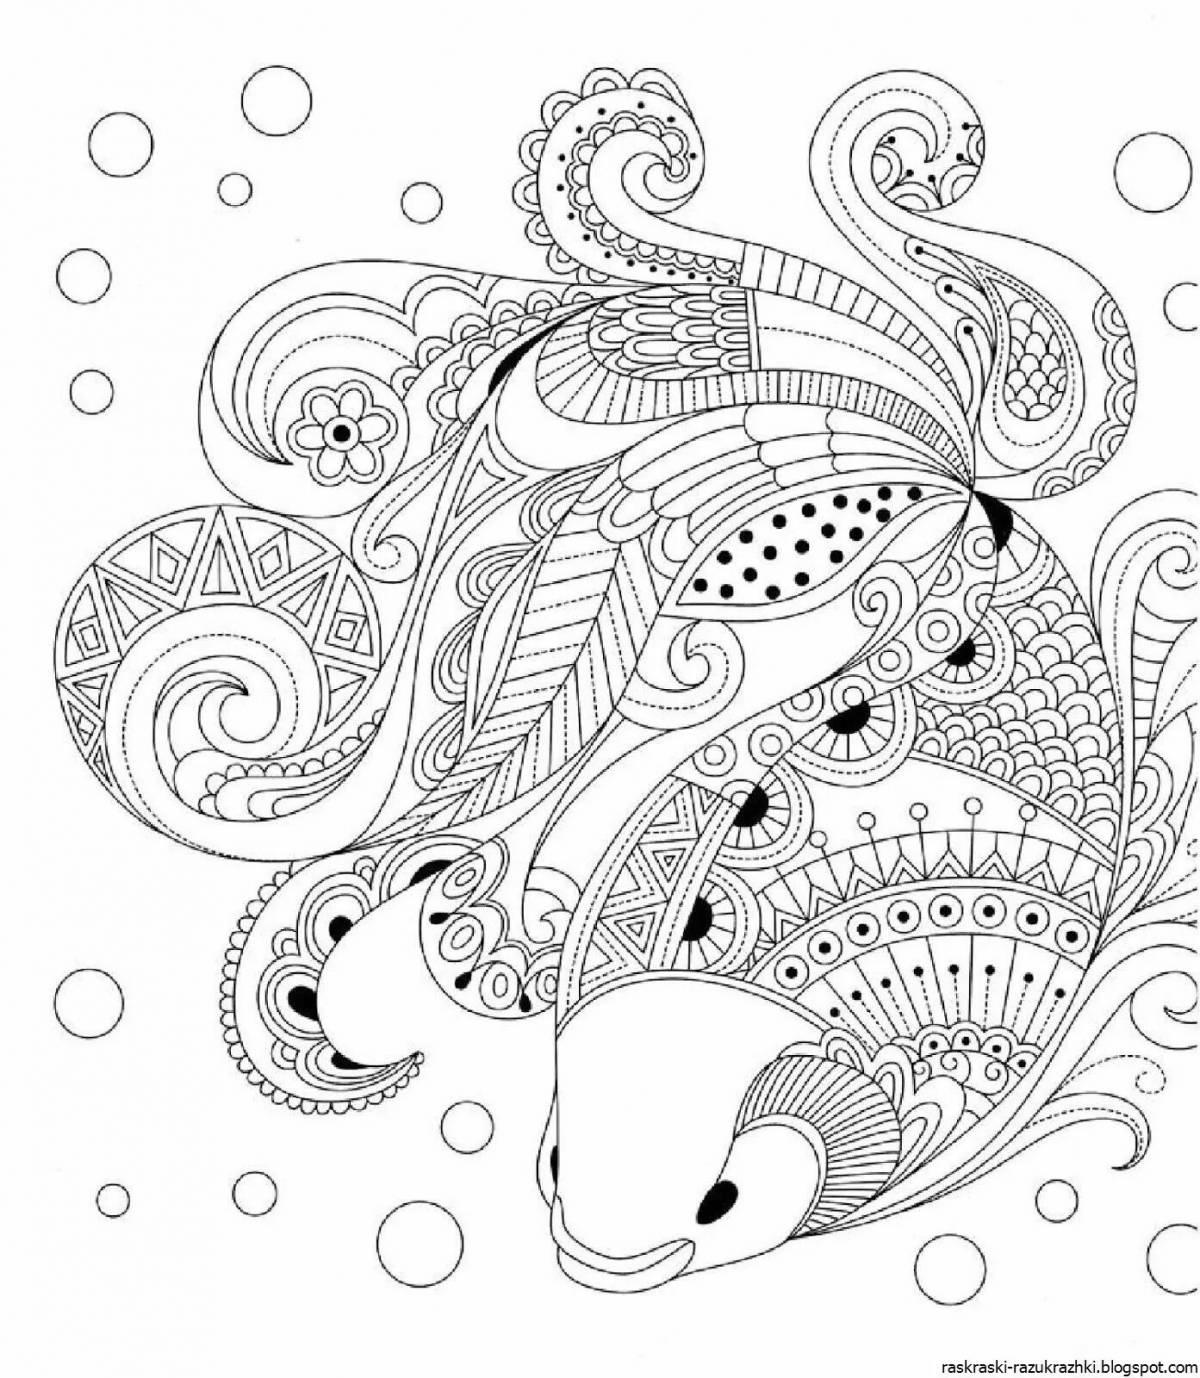 Coloring art therapy for struggling children